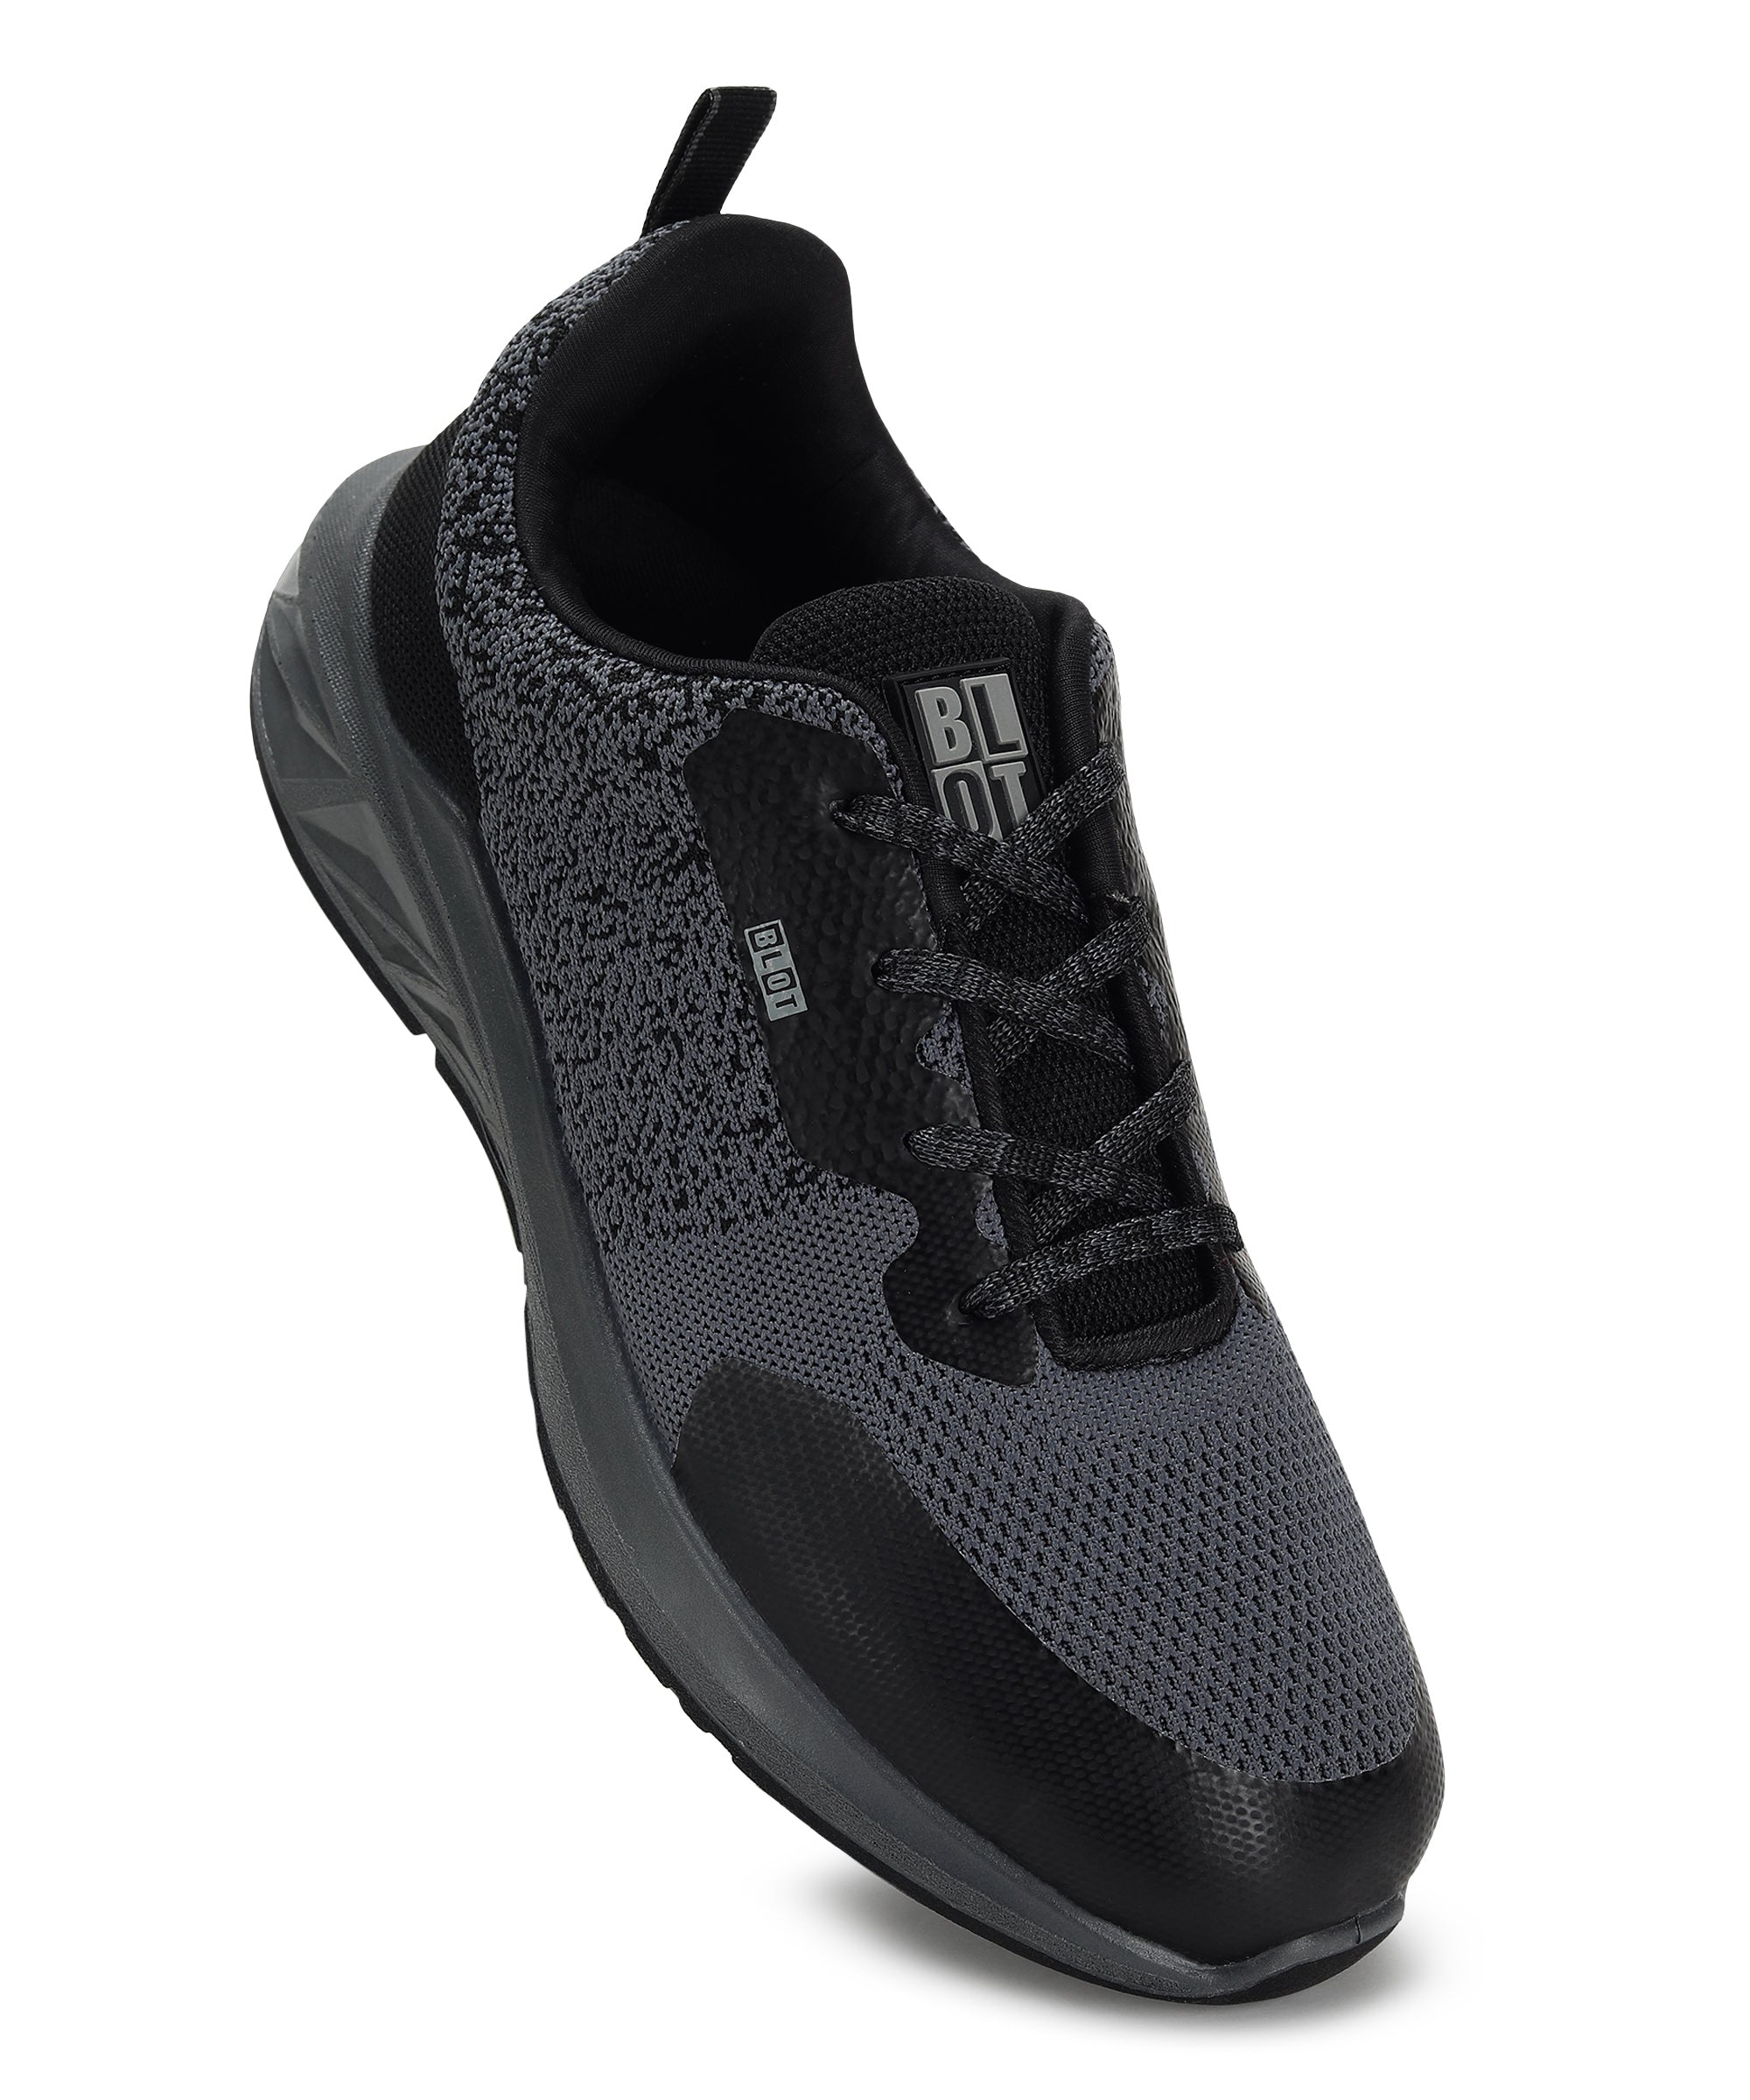 Paragon PUK3506GS Men Walking Shoes | Athletic Shoes with Comfortable Cushioned Sole for Daily Outdoor Use